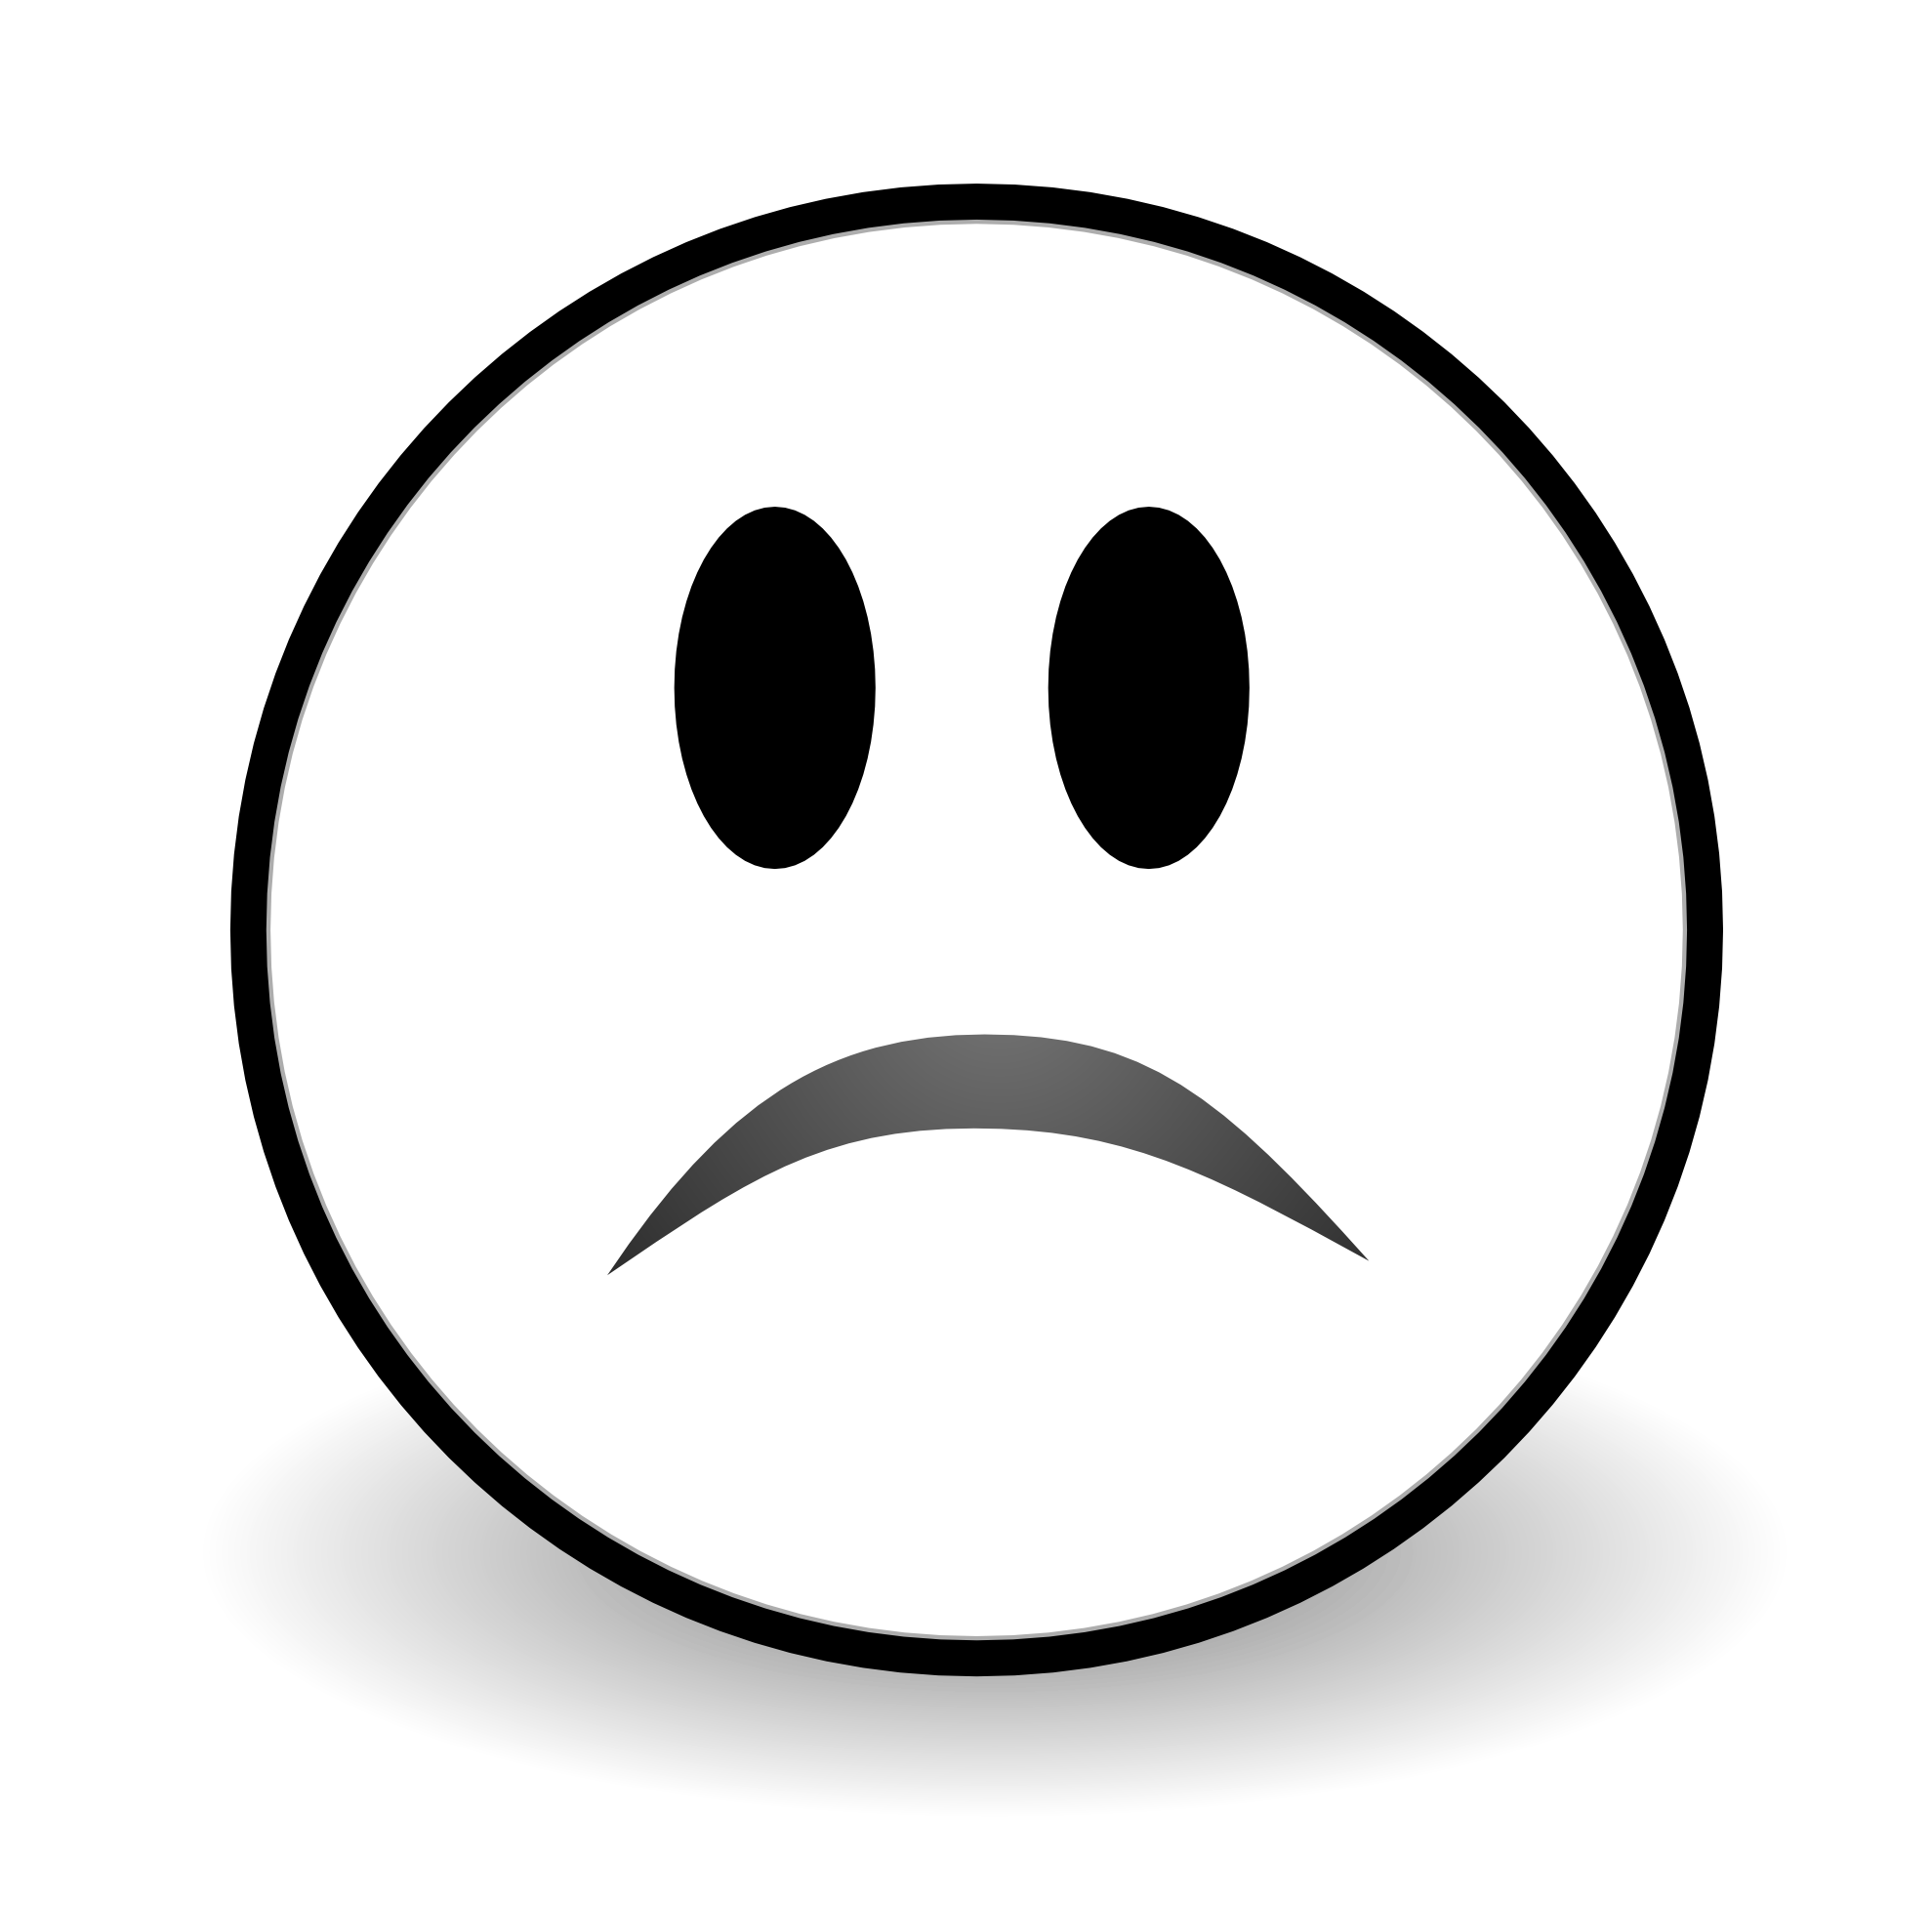 Sad face clipart black and white free images 2